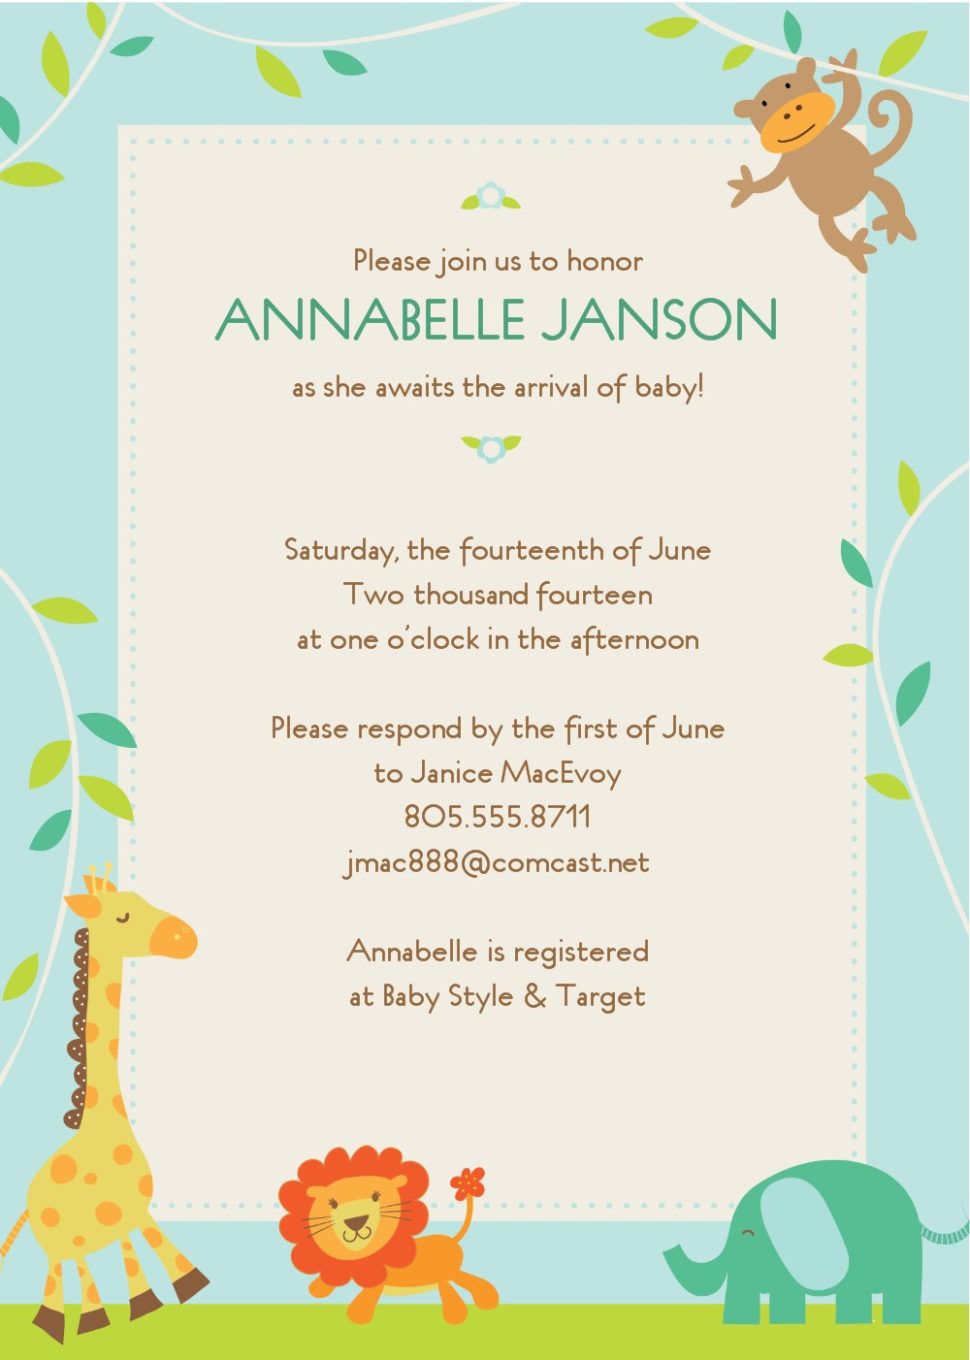 Medium Size of Baby Shower:sturdy Baby Shower Invitation Template Image Concepts Baby Shower Invitation Template Full Size Of Colorsbaby Shower Invite Template Free Printable Baby Shower Invite Template Indesign